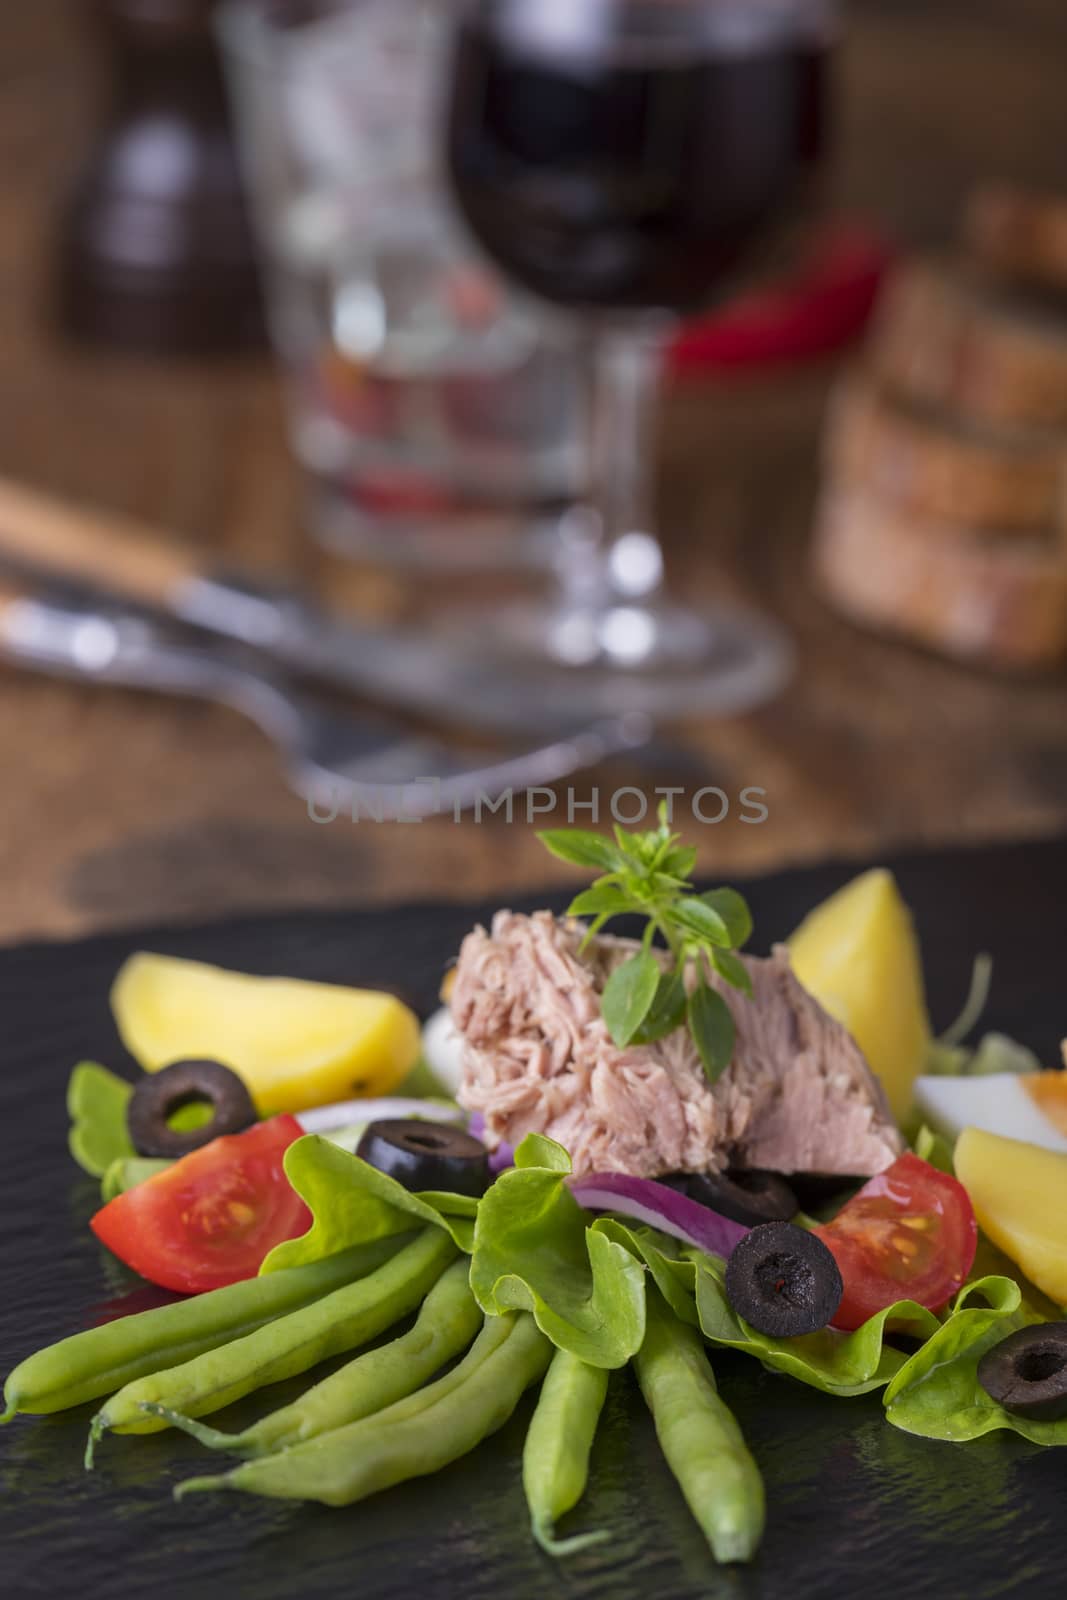 salad nicoise on a wooden background by bernjuer